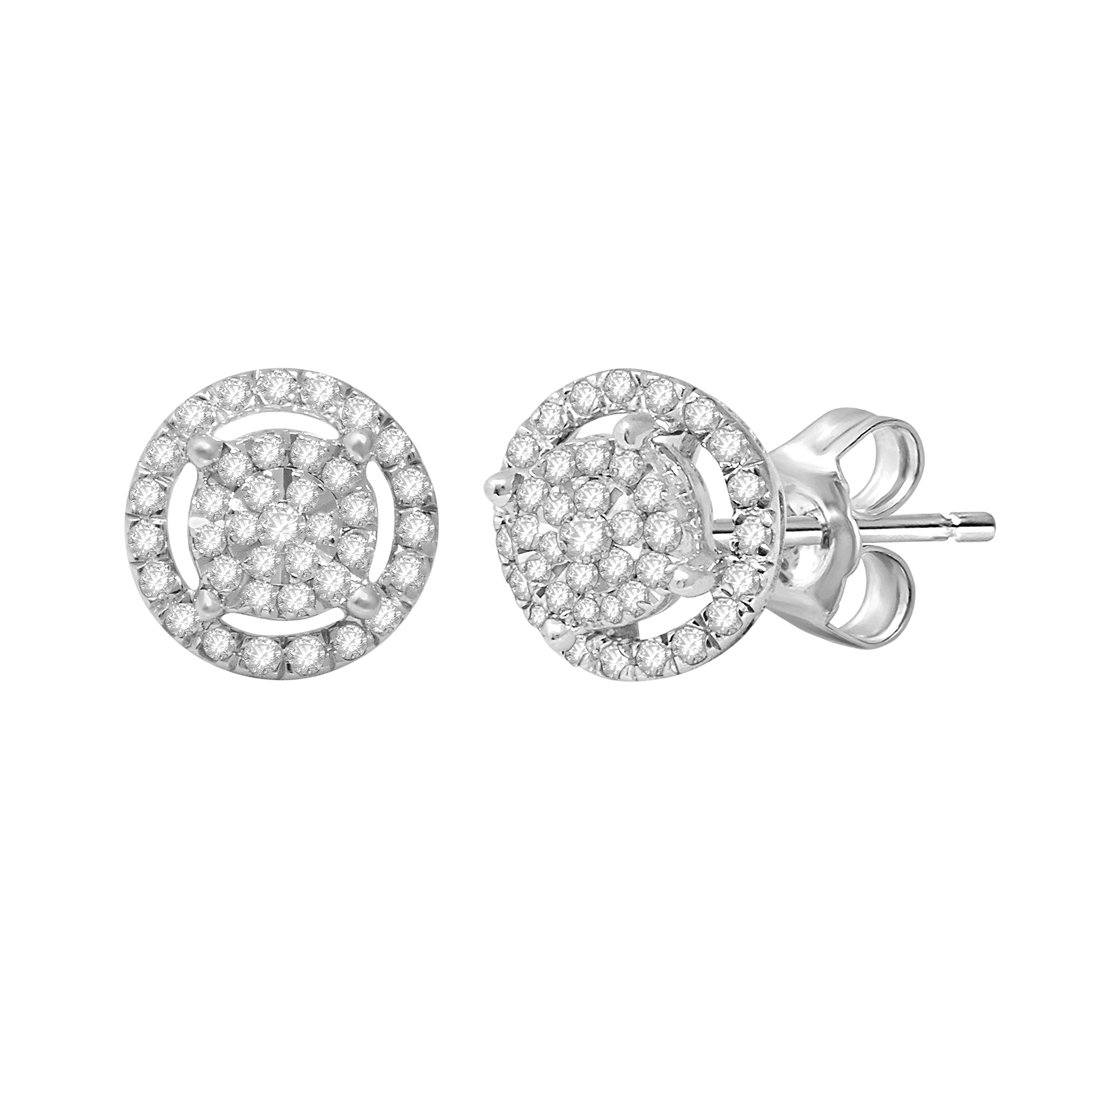 Martina Halo Earrings with 1/3ct of Diamonds in 9ct White Gold Earrings Bevilles 